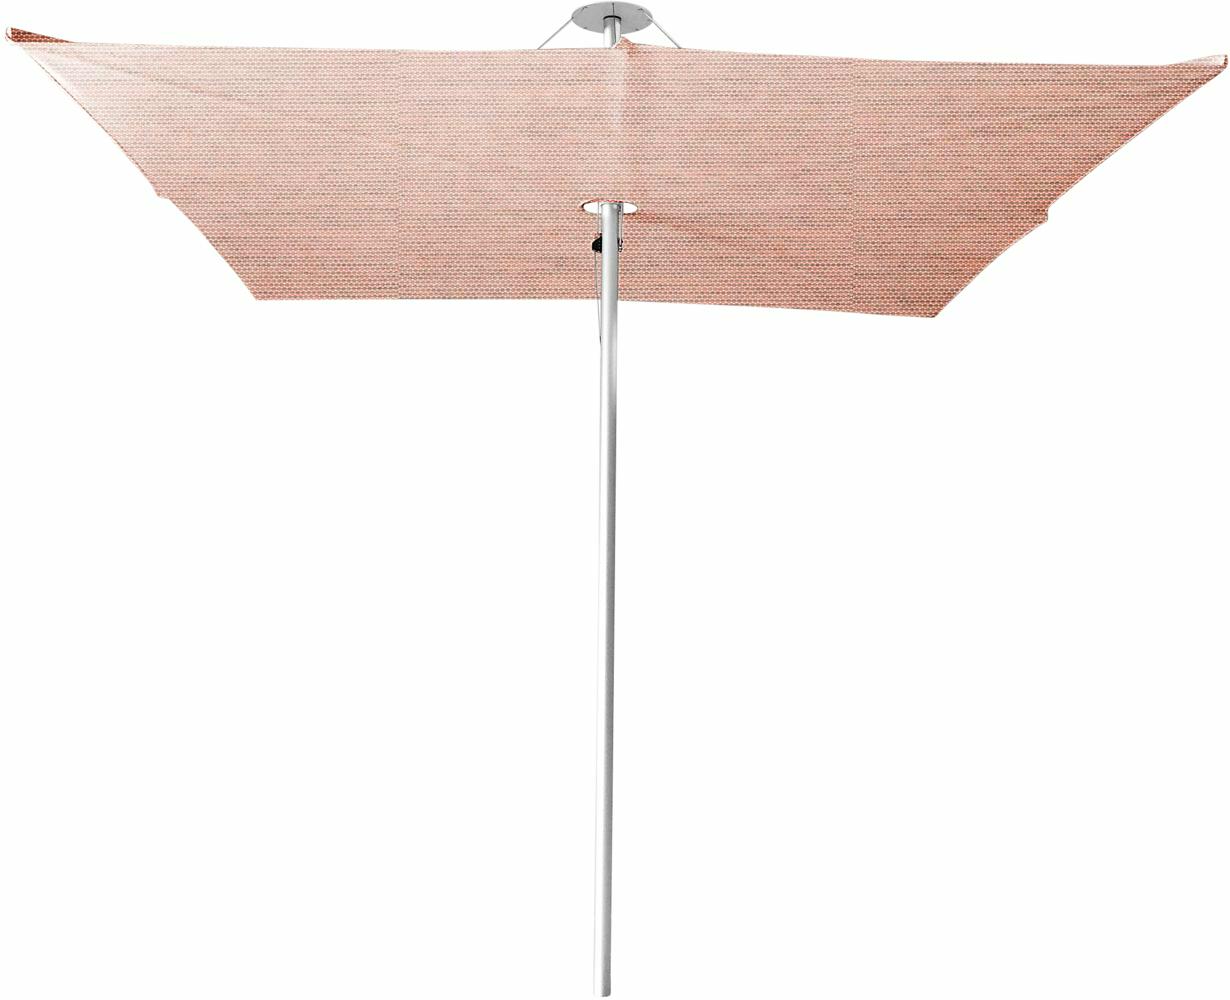 Infina center post umbrella, 2,5 m square, with frame in Aluminum and Solidum Blush canopy. 